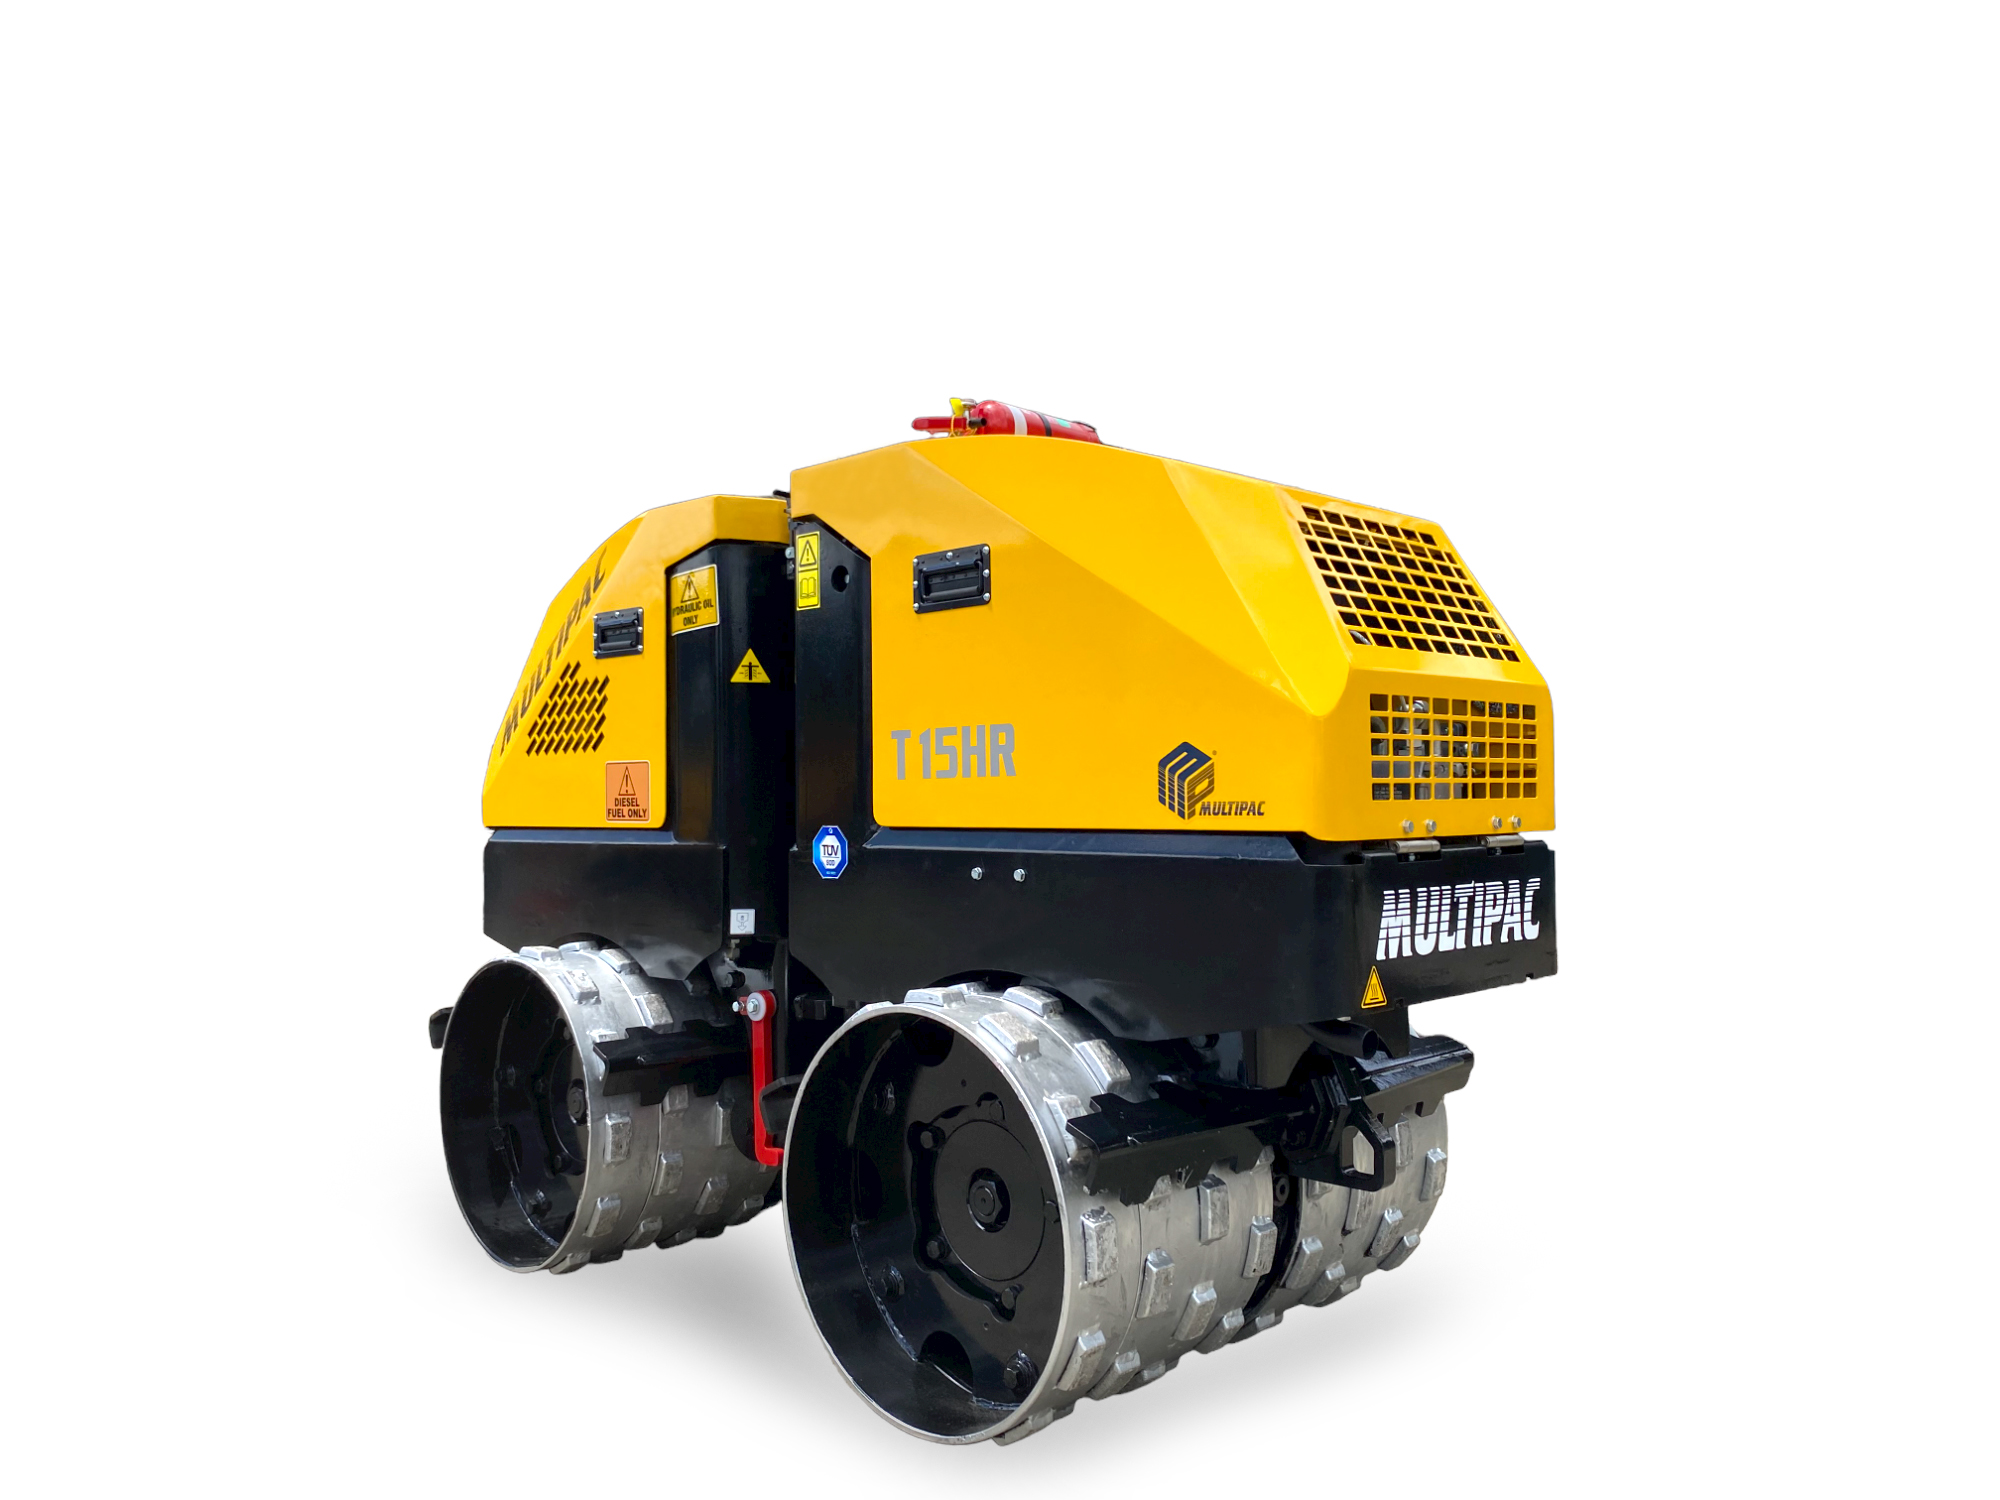 Multipac T15HR Trench Roller side back